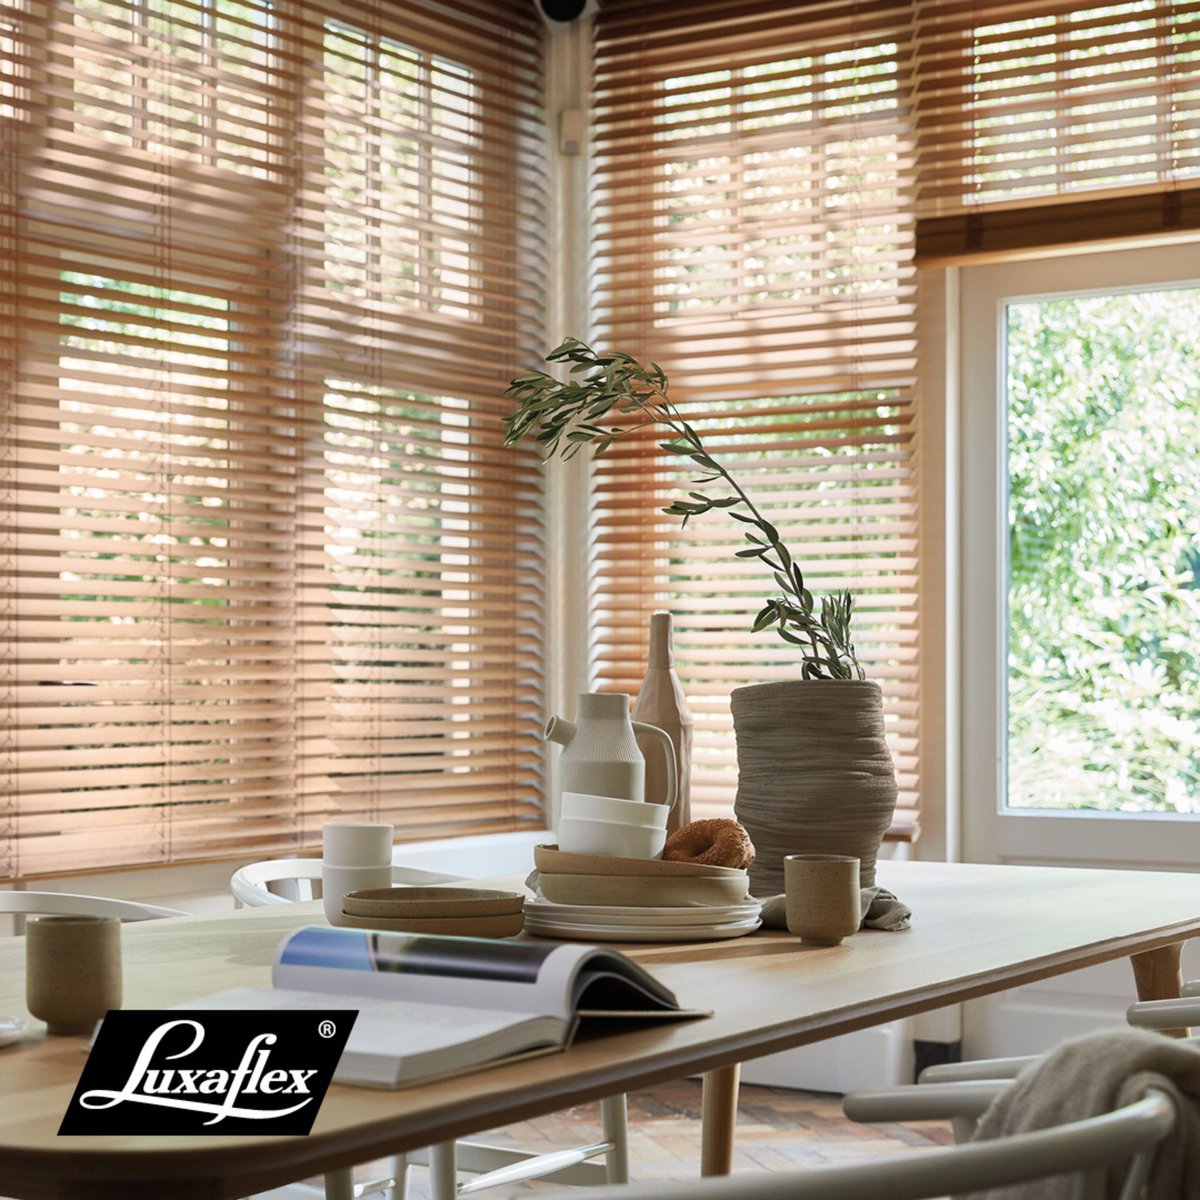 Luxaflex® knows every home and window is different, so was one step ahead when designing its new collection of wood blinds...

50mm - perfect when privacy is a priority
70mm - ideal for an airier feel with panoramic views

Come and see them for yourself in our showroom!